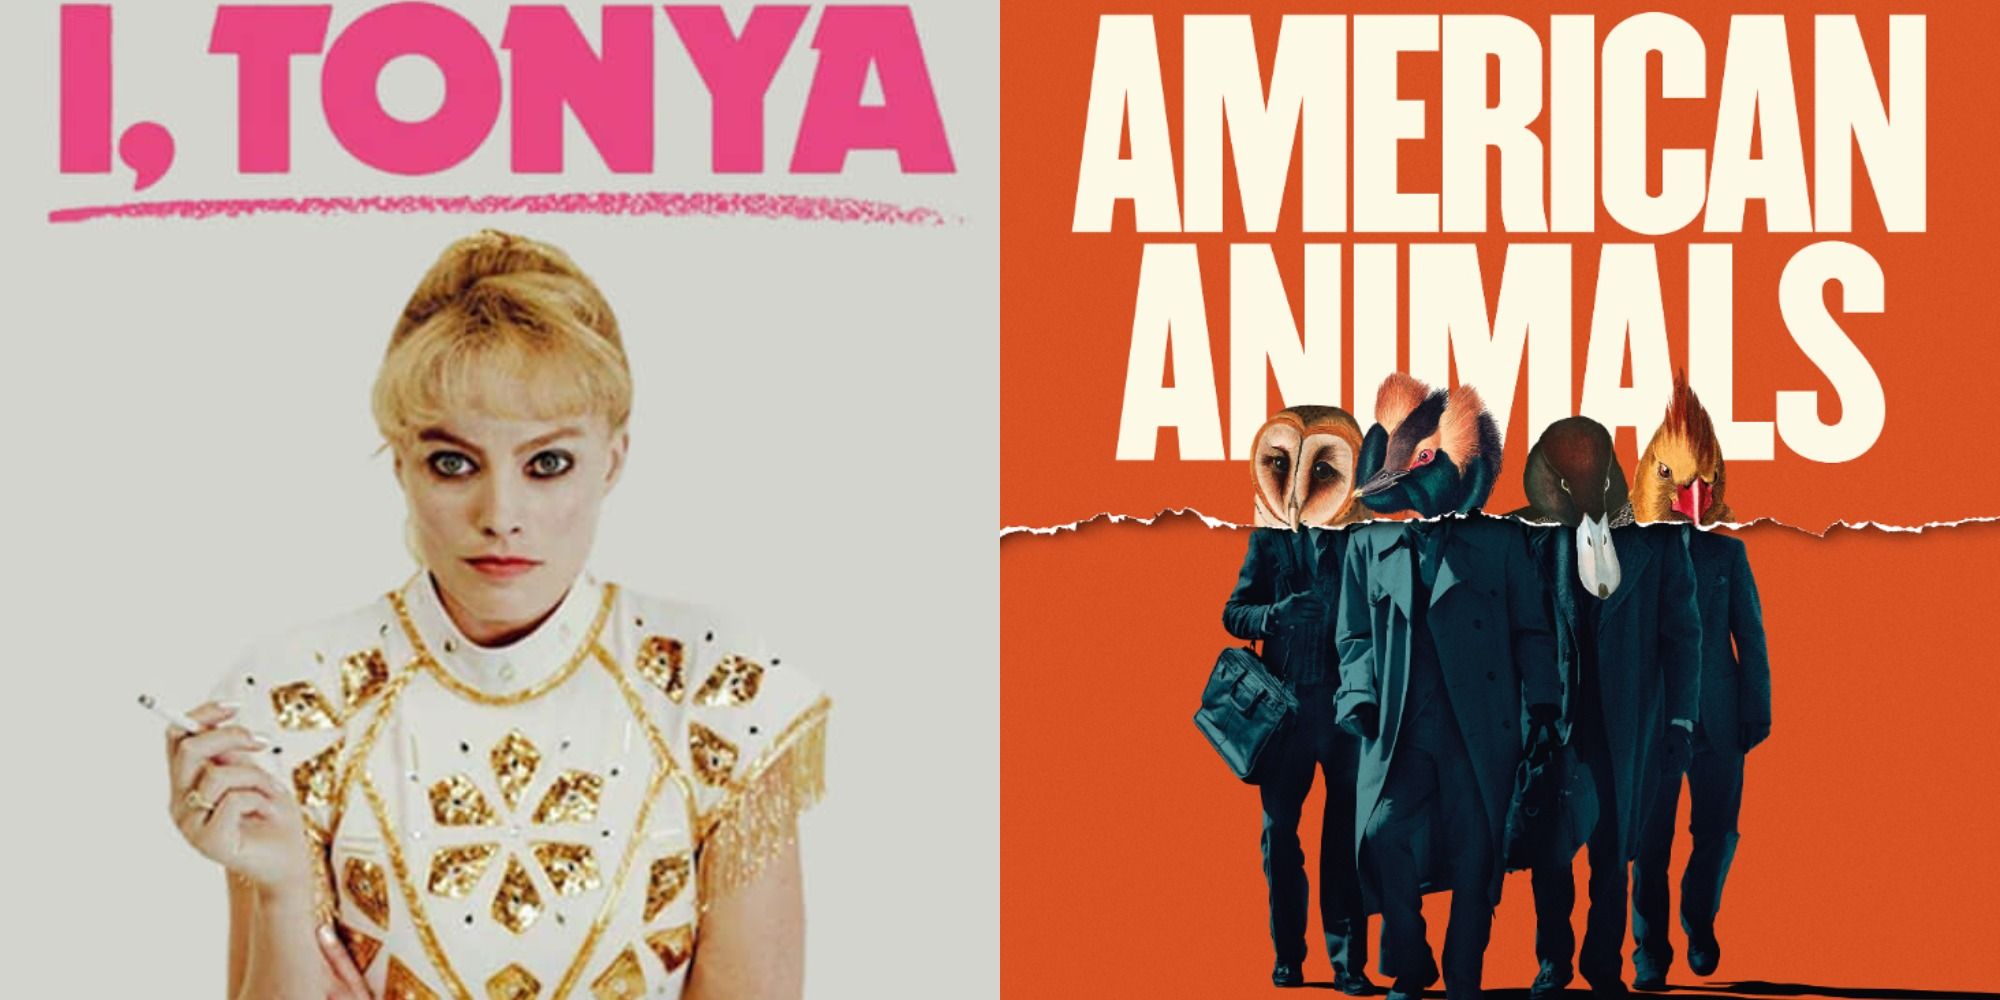 Split image showing posters for the movies I, Tonya and American Animals